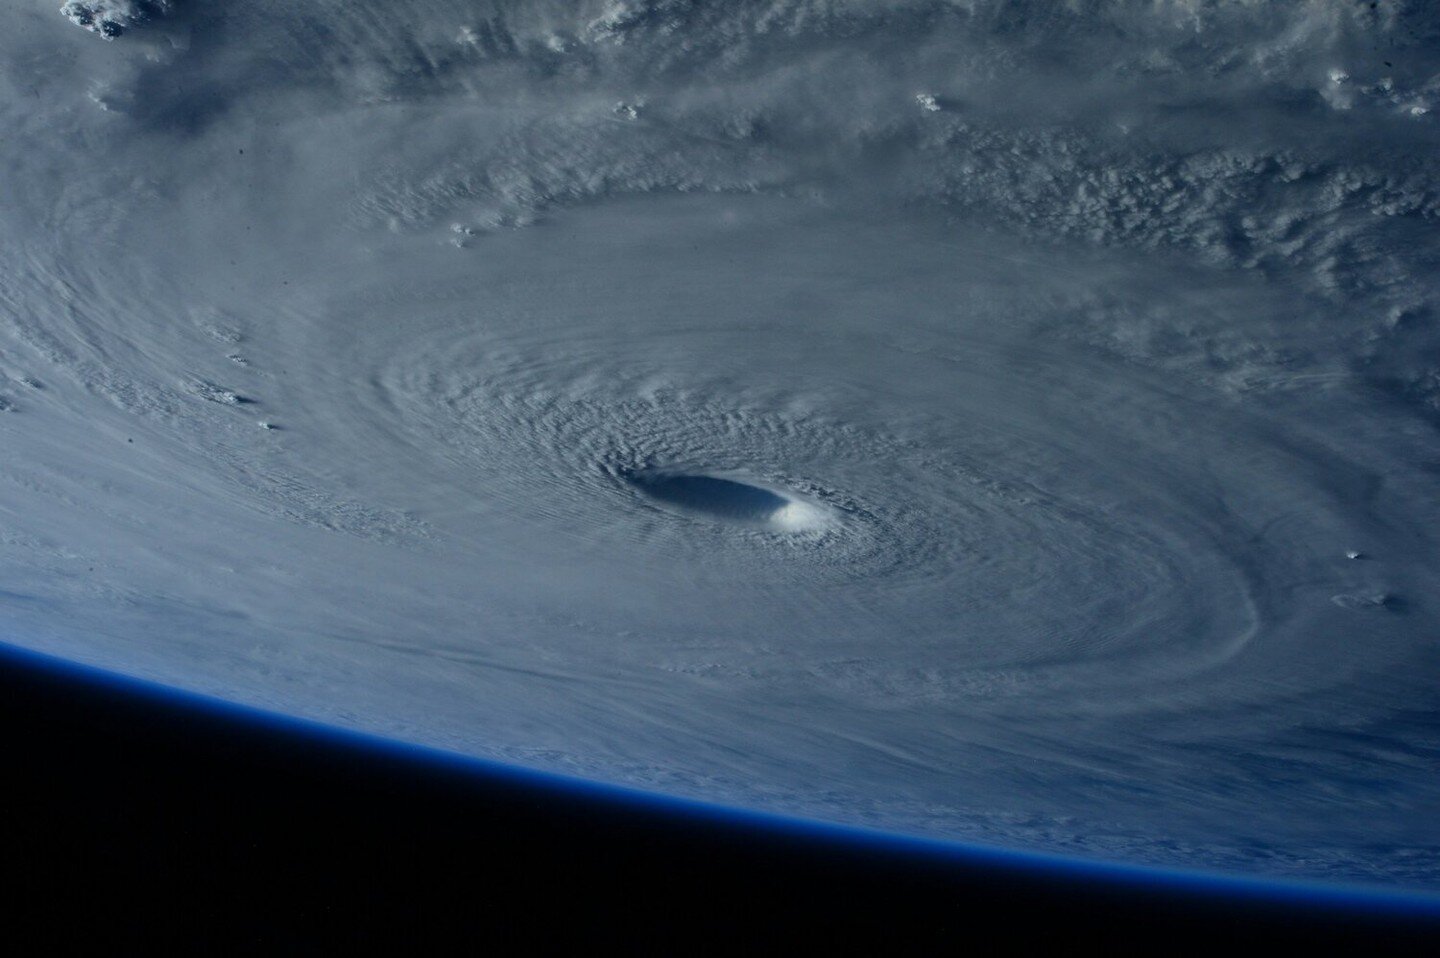 Climate scientists are advocating for the addition of a new hurricane category, Category 6, as climate change amplifies the intensity of storms, challenging the existing Saffir-Simpson hurricane wind scale. In a study published in the Proceedings of 